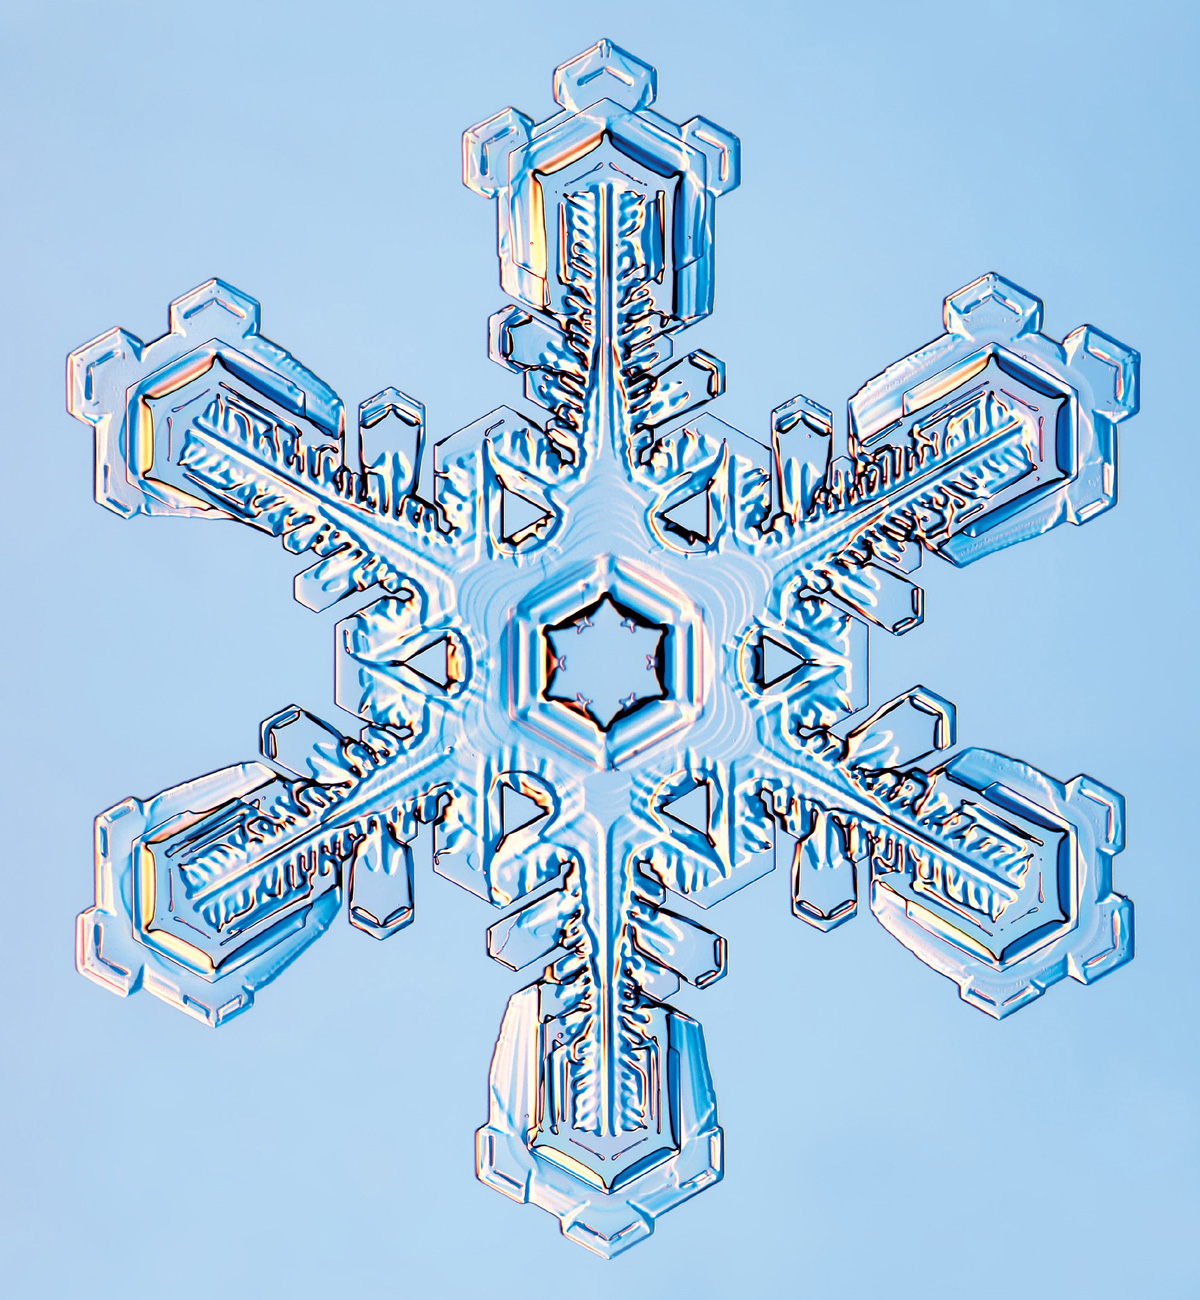 An image of a snowflake captured by Kenneth Libbrecht with a specially designed photomicroscope.